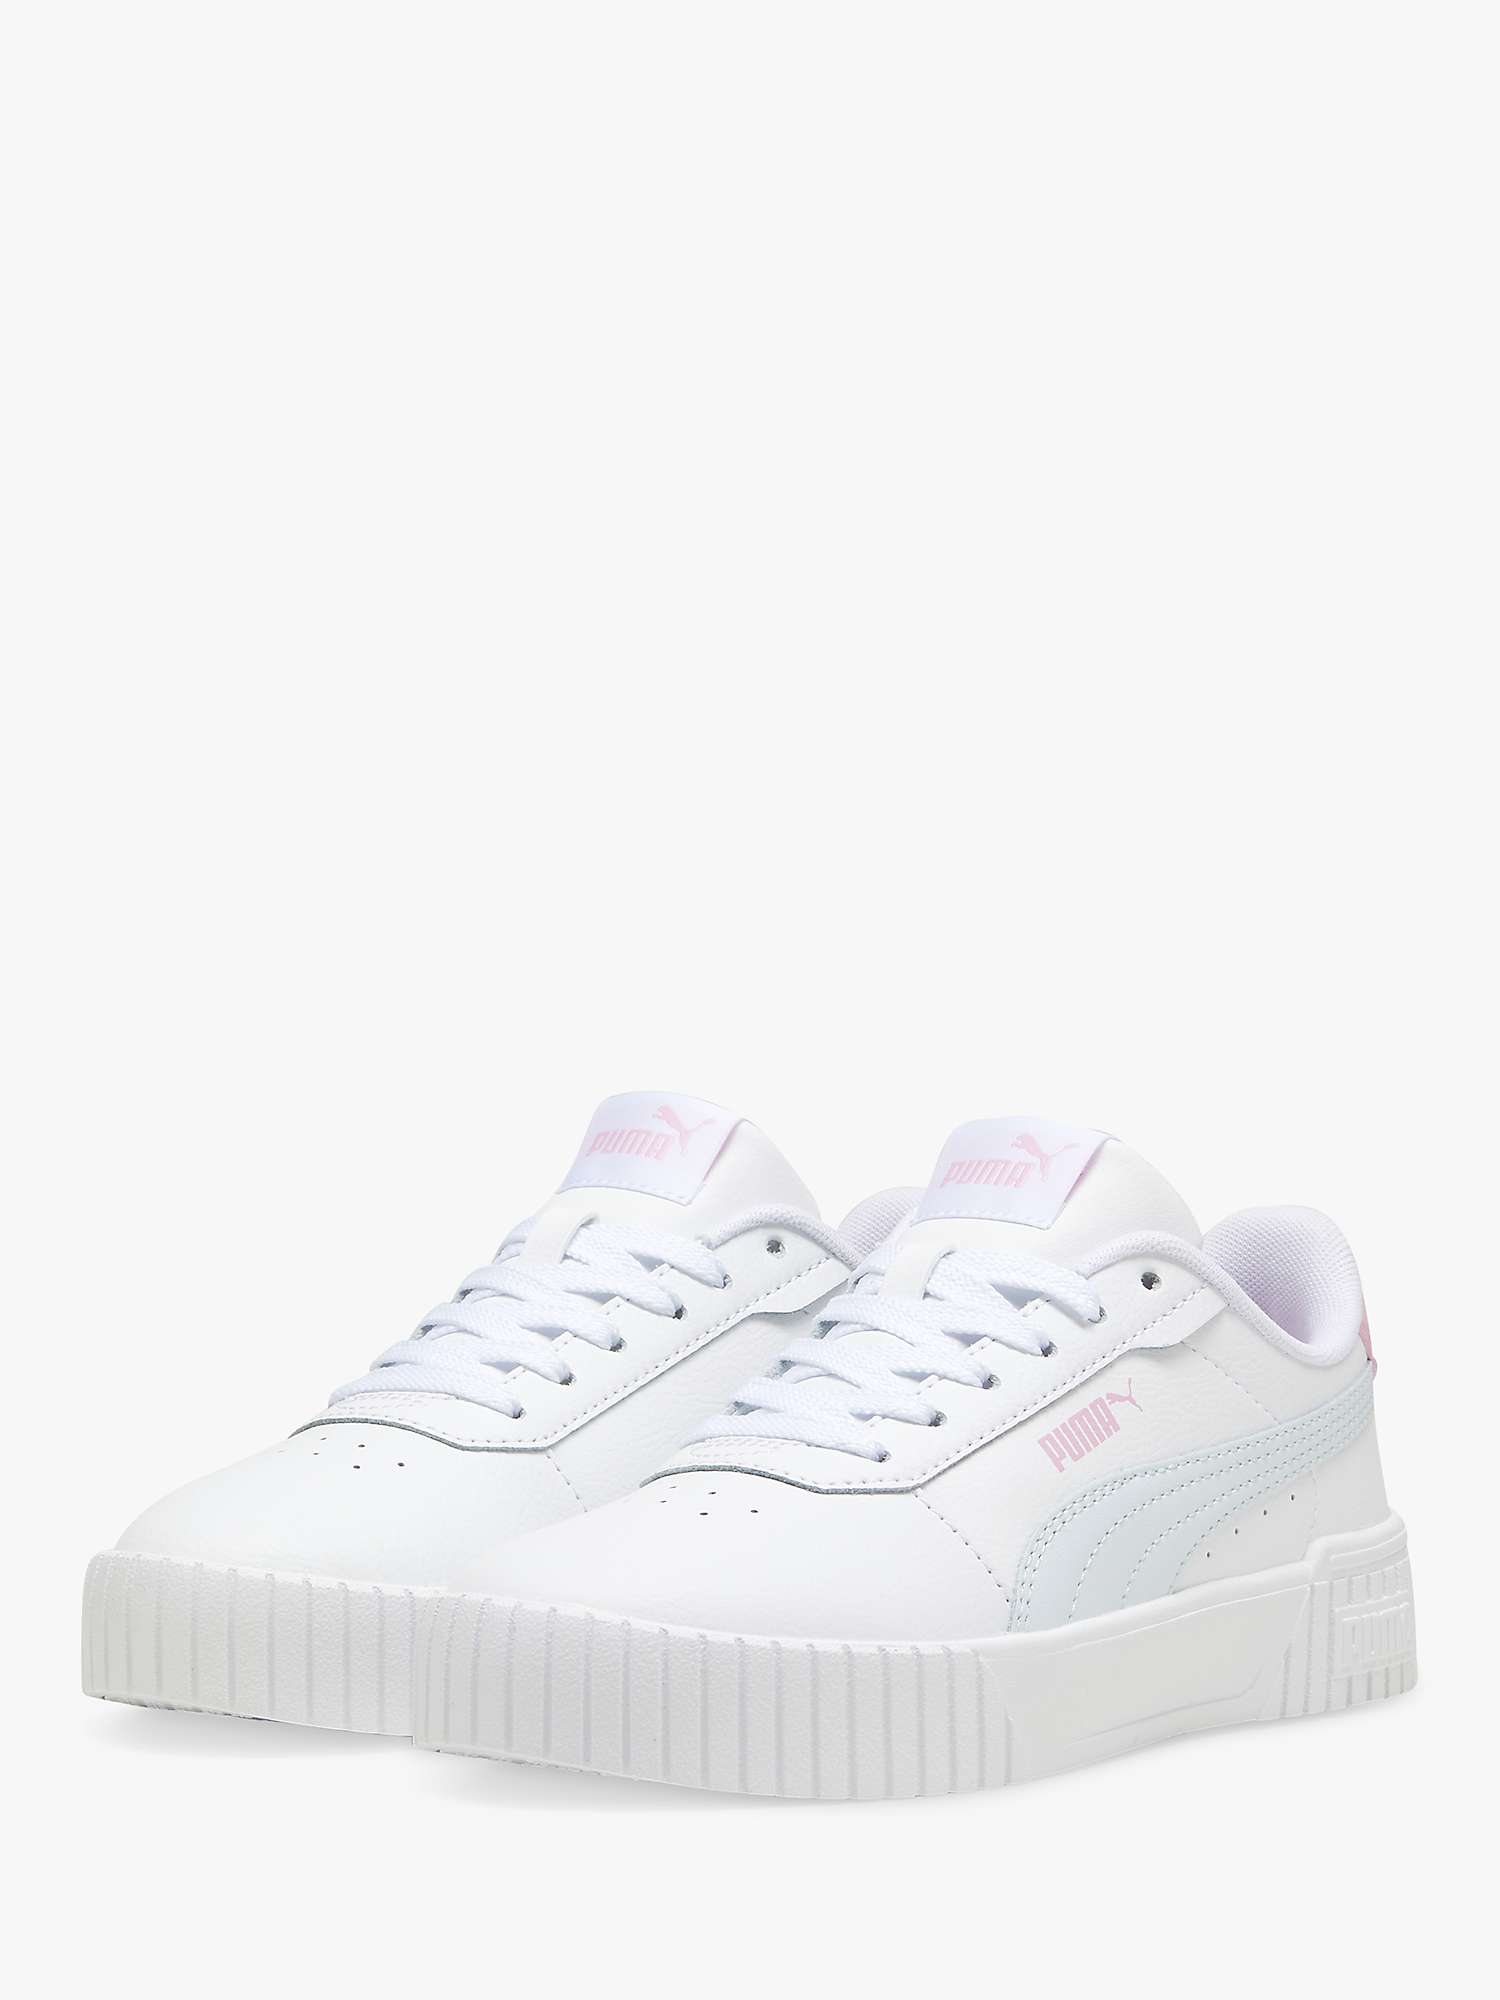 Buy PUMA Kids' Carina 2.0 Leather Trainers, White/Multi Online at johnlewis.com